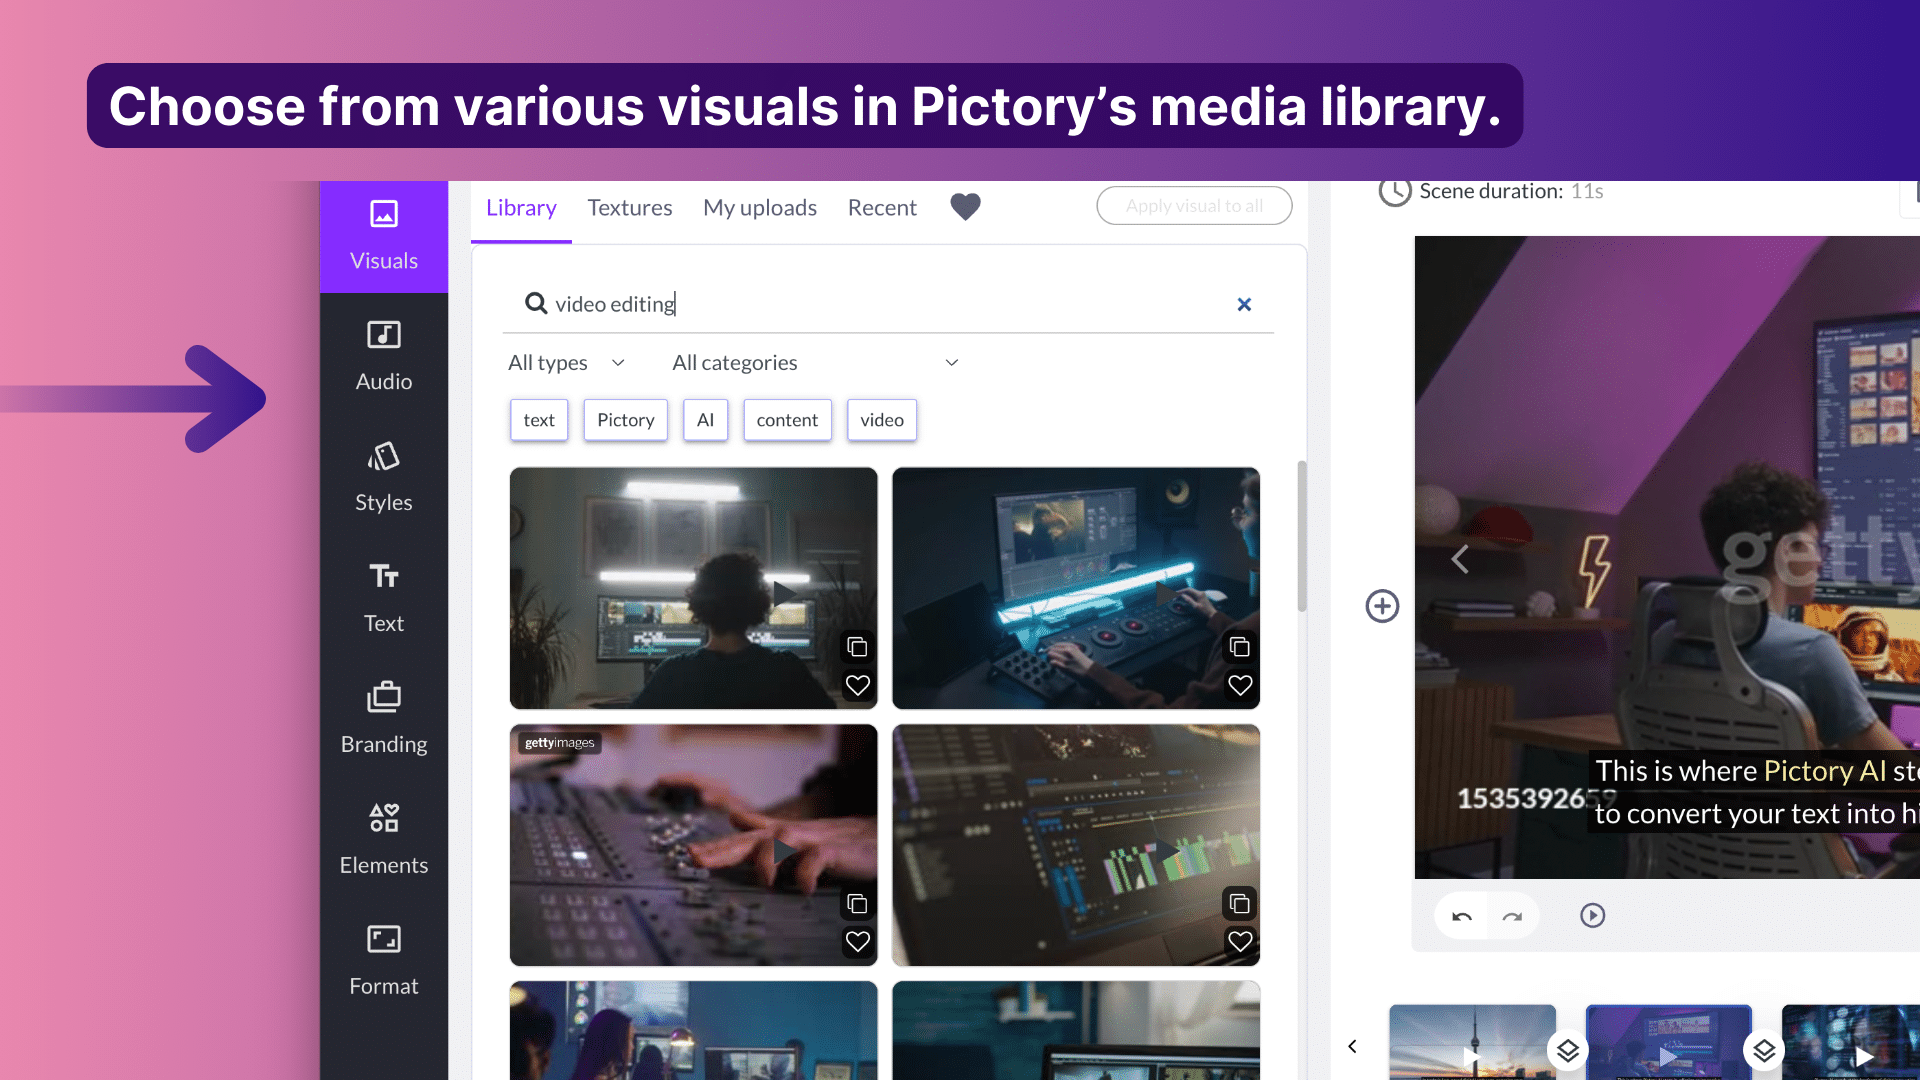 Pictory visual library, pictory video library, getty images